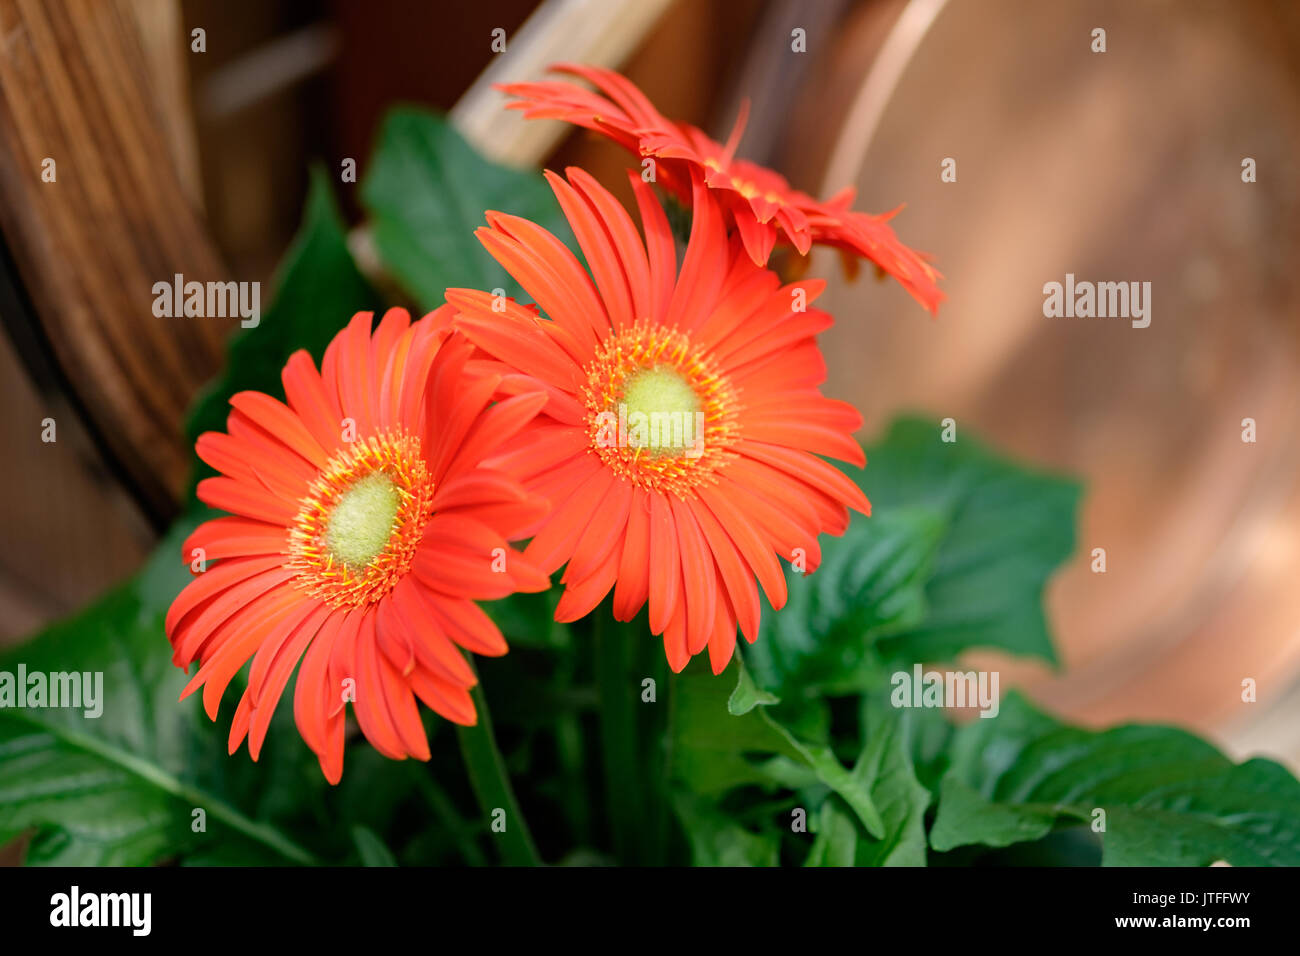 Red shasta daisies growing in a plant nursery setting. Stock Photo